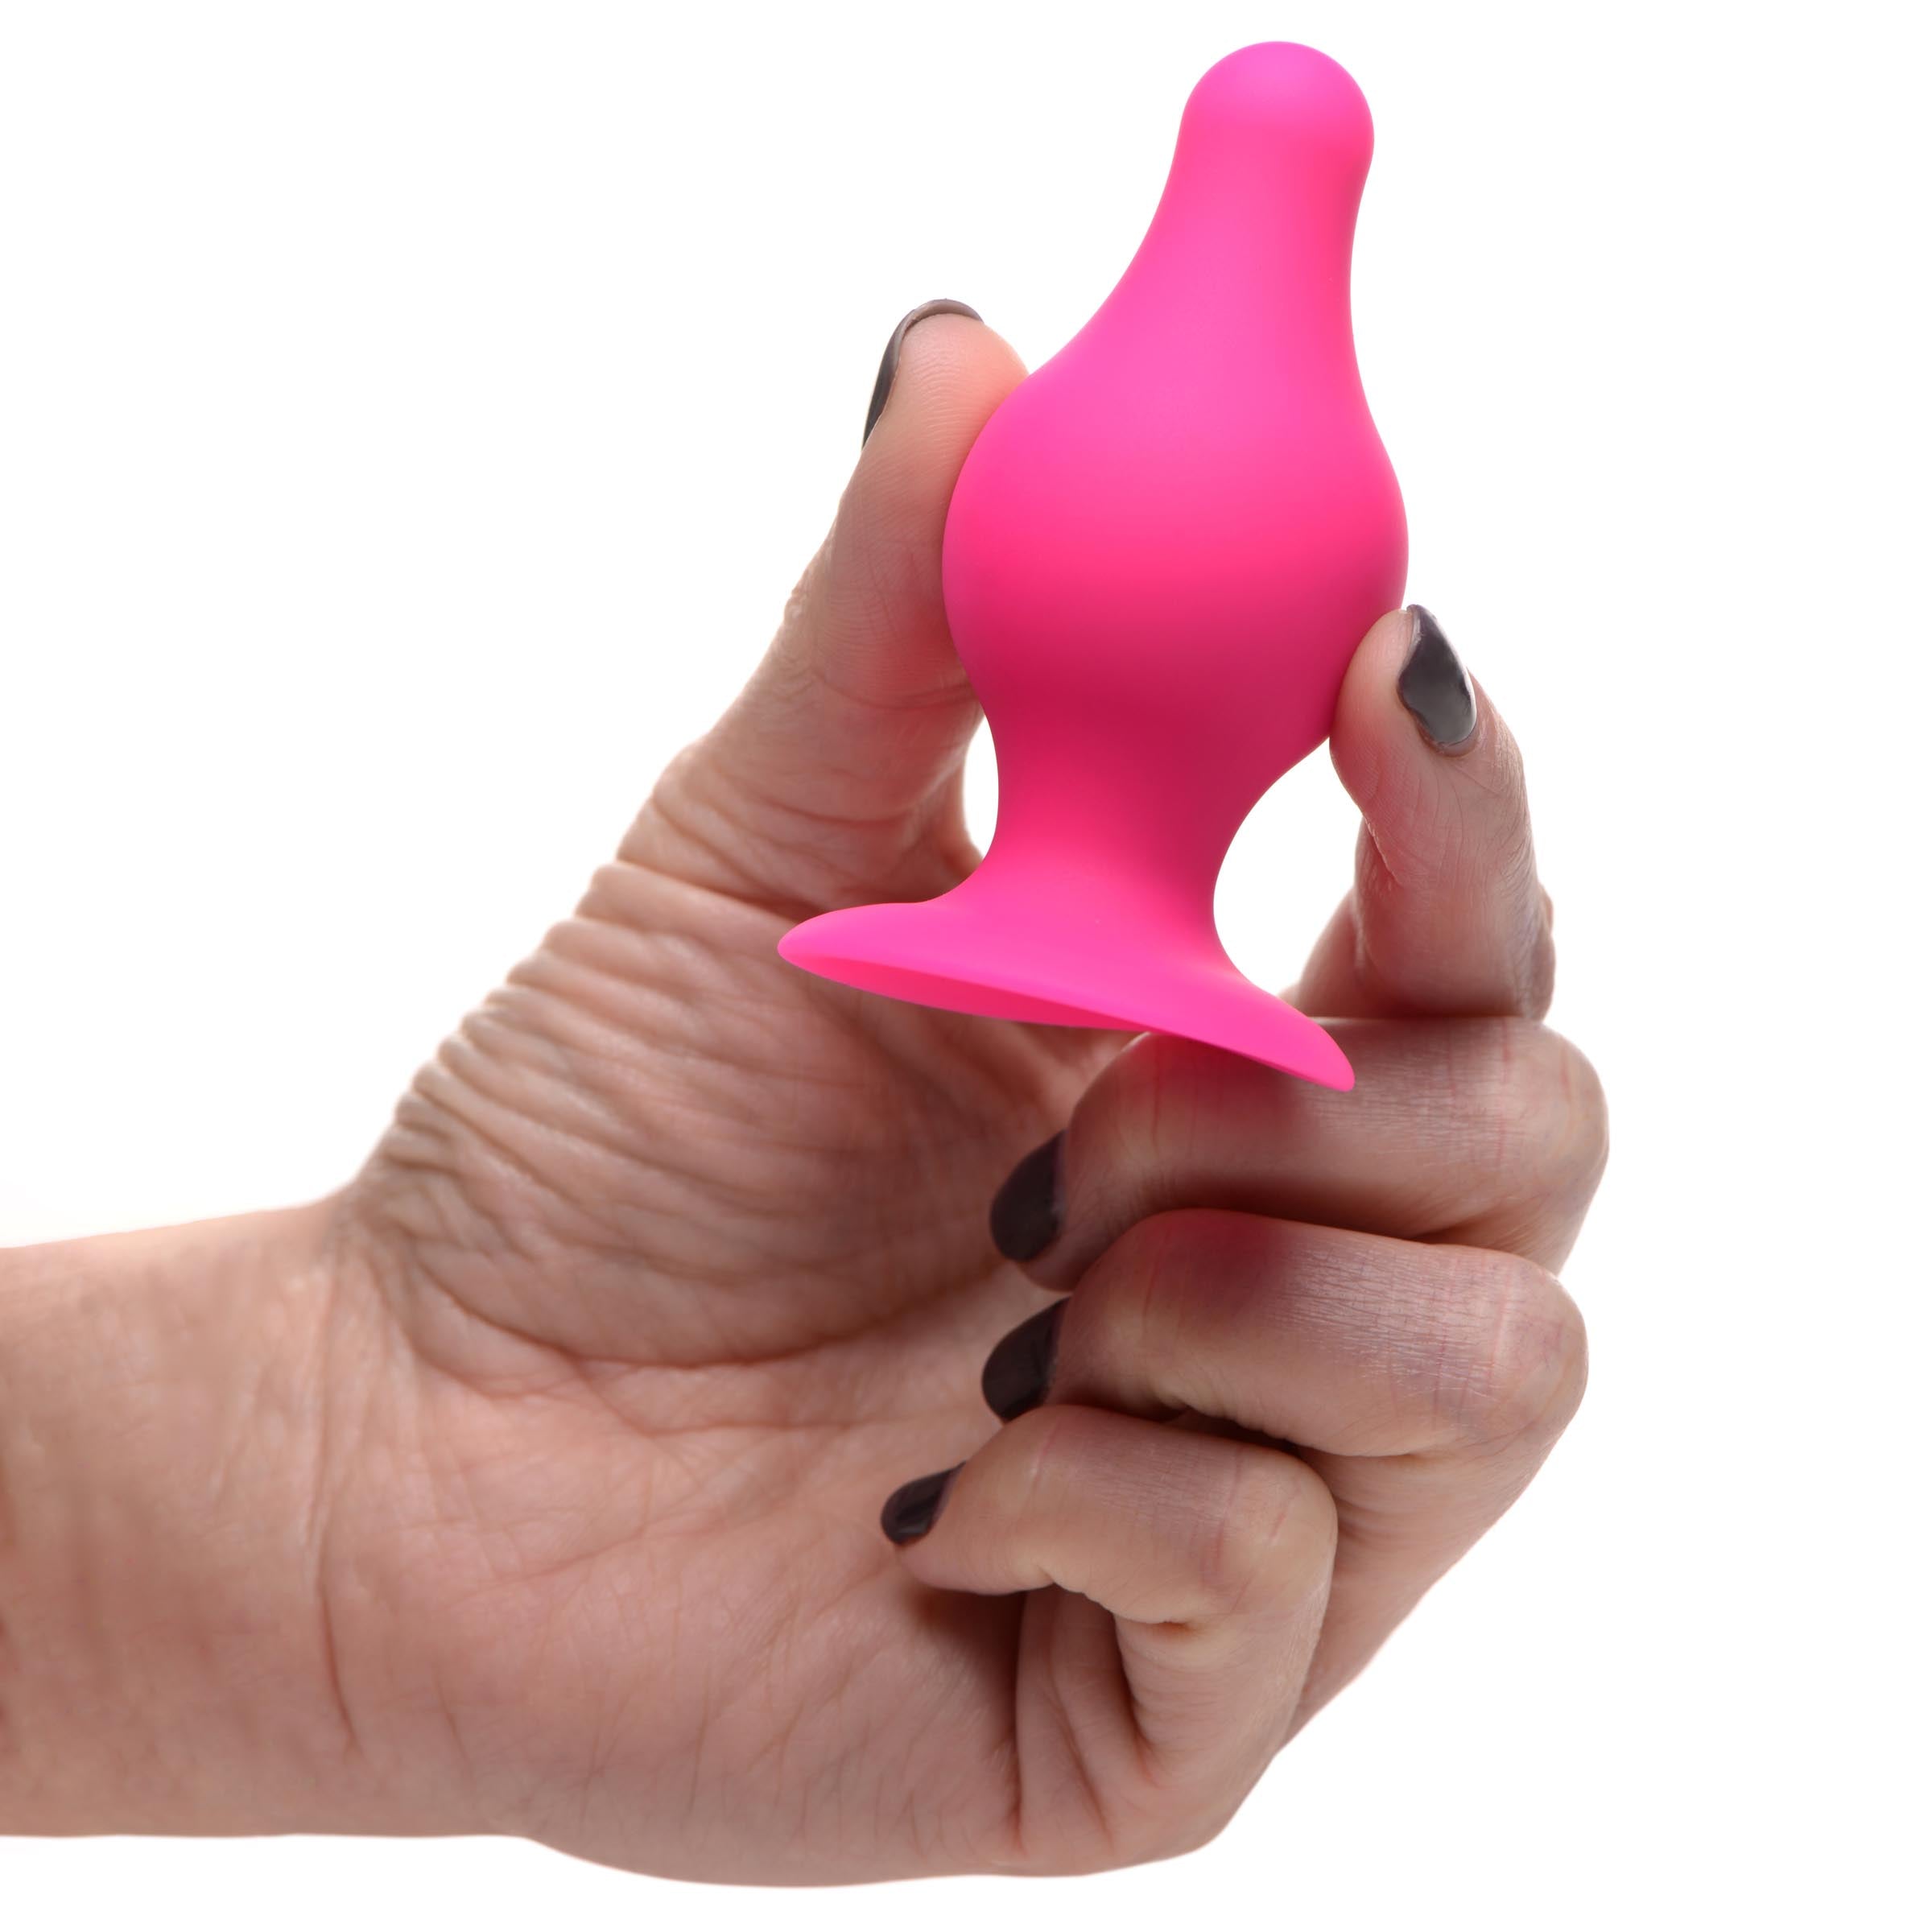 Squeezable Tapered Small Anal Plug